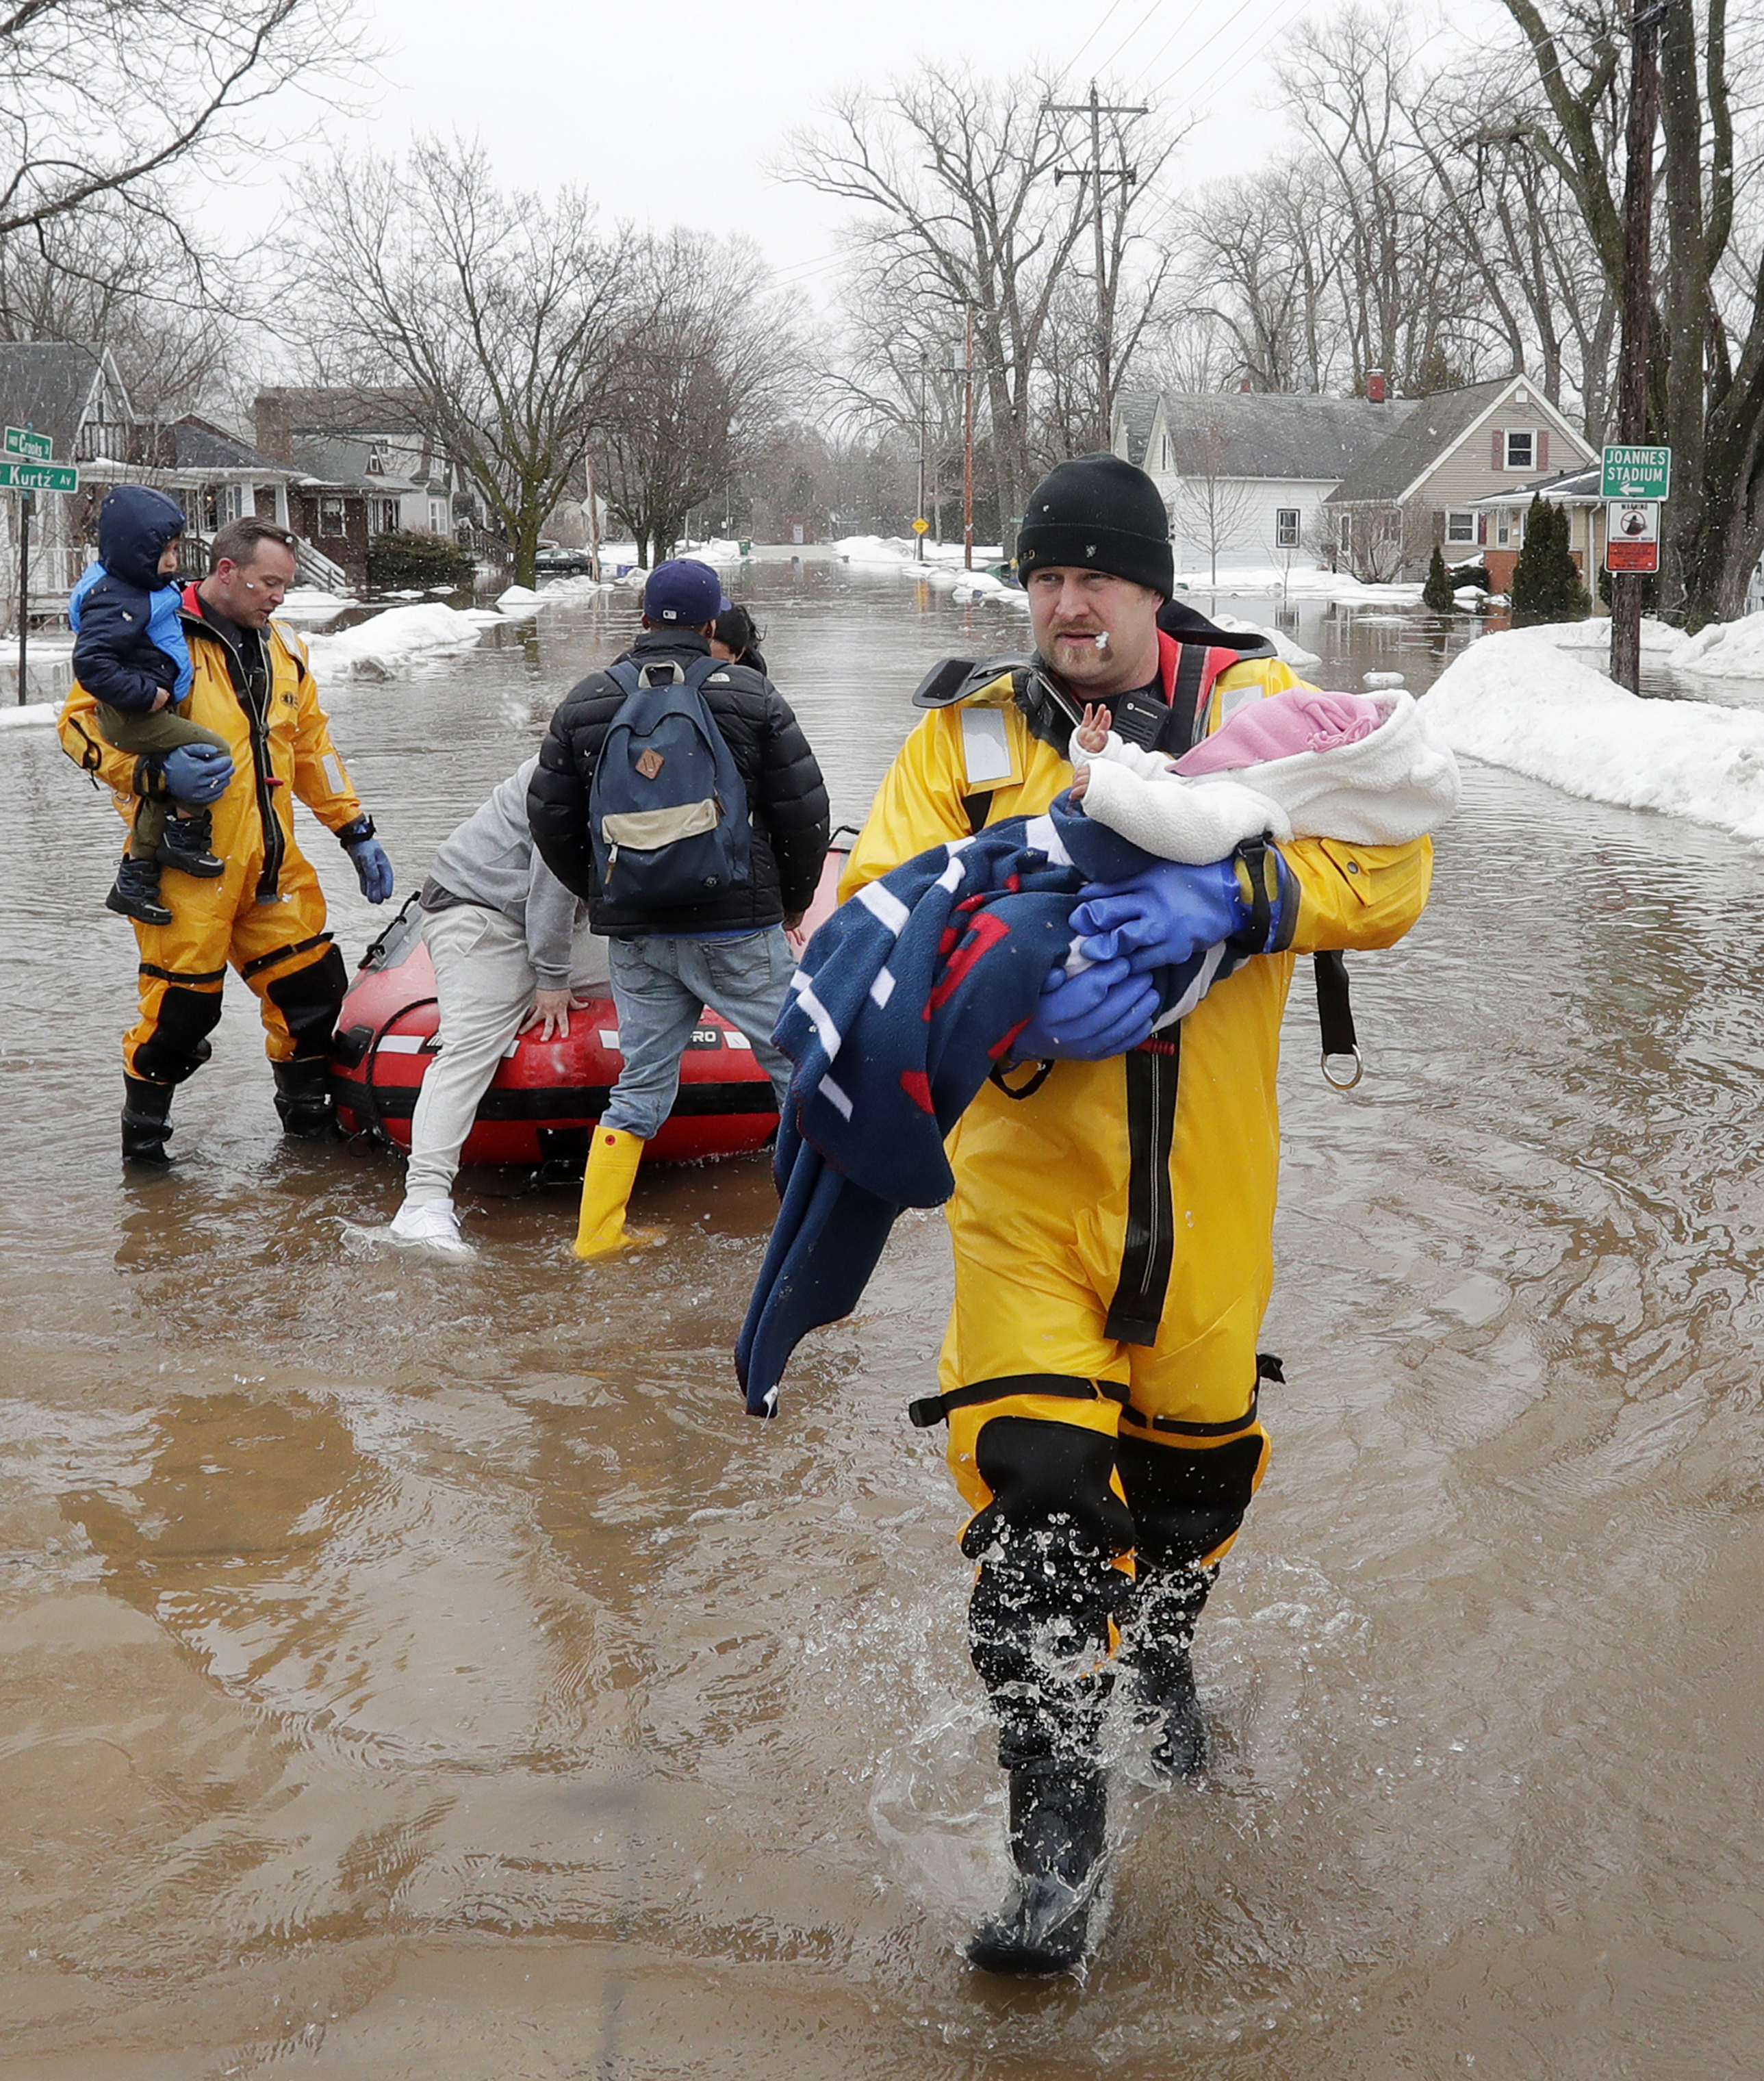 Firefighter Brian Farr carries a baby from the boat as the GBFD assisted residents with home evacuations on Crooks Street due to the East river flooding on March 15, 2019 in Green Bay, Wisconsin. (Adam Wesley—The Post-Crescent via AP)